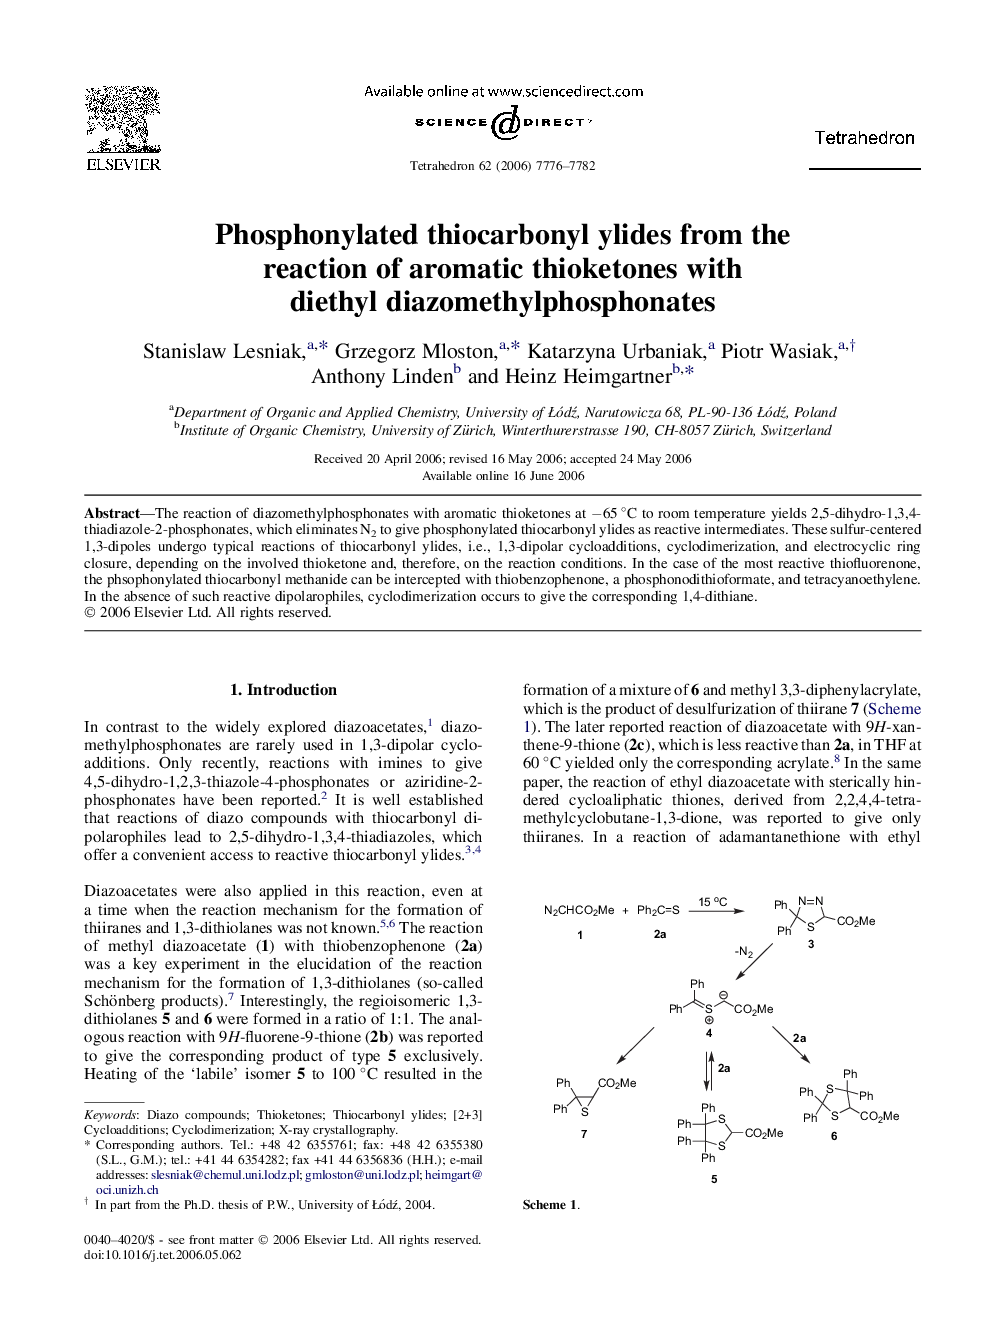 Phosphonylated thiocarbonyl ylides from the reaction of aromatic thioketones with diethyl diazomethylphosphonates